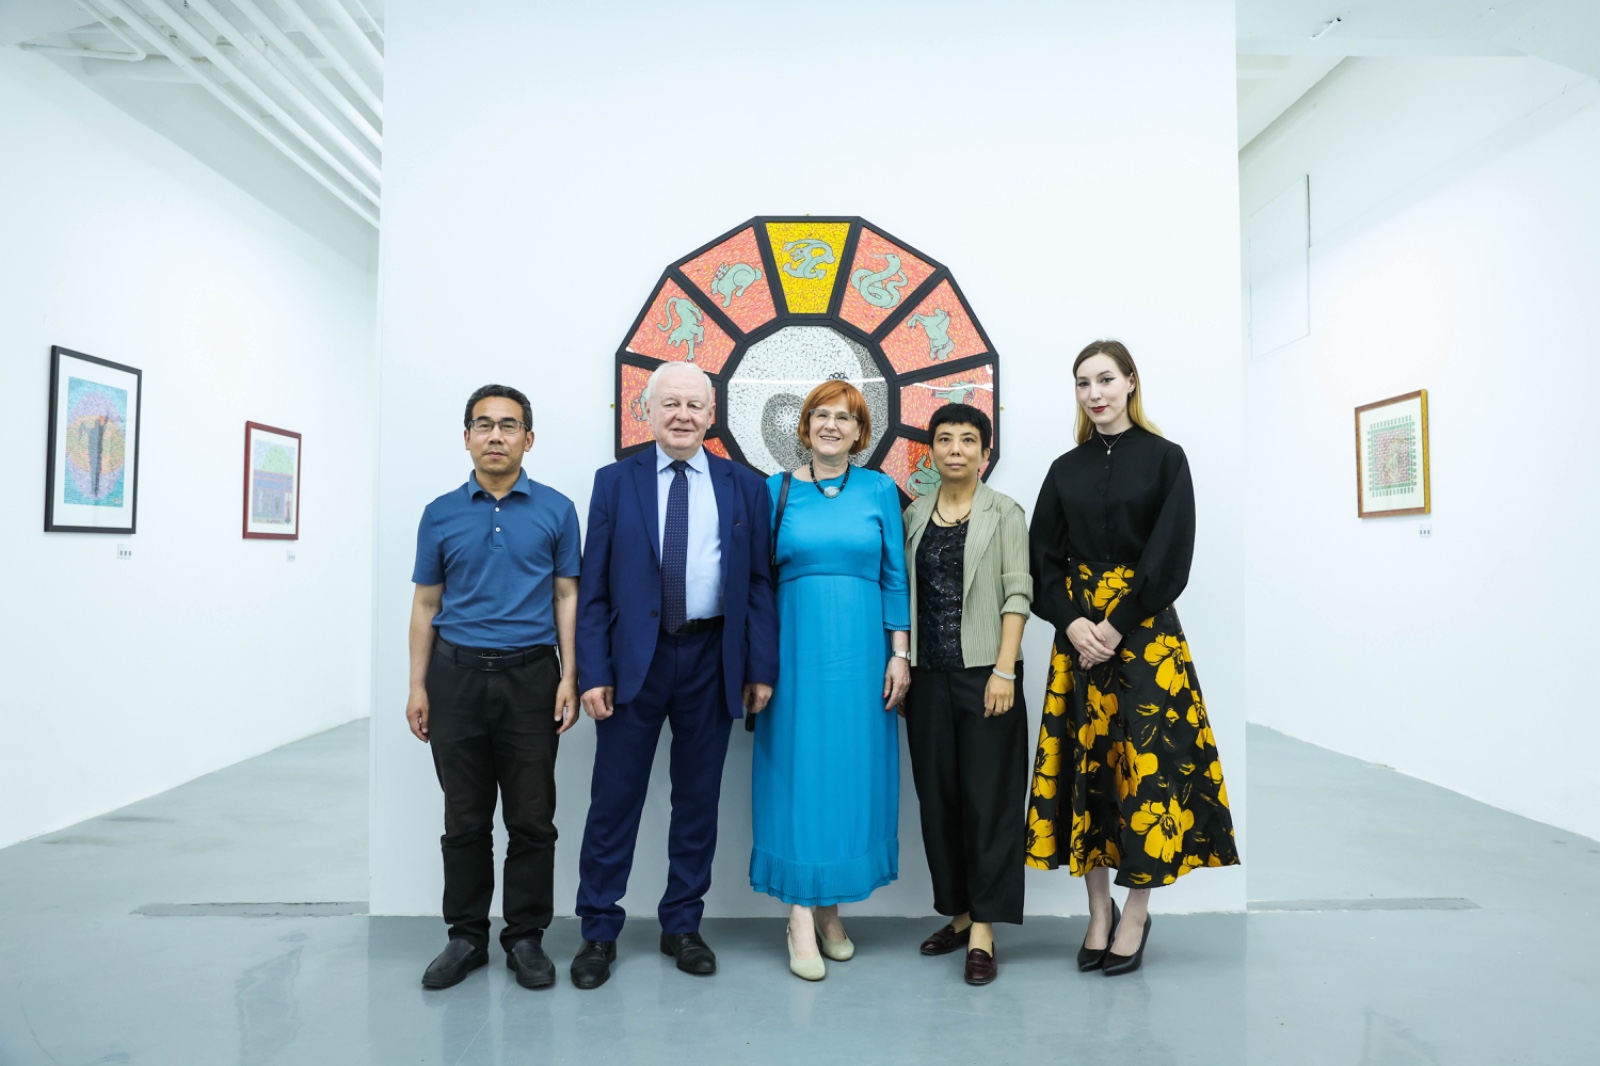 🐲Szendrei Judit’s Stamp Art Exhibition – “Year of the Dragon” officially opened at Horizon Art Space!